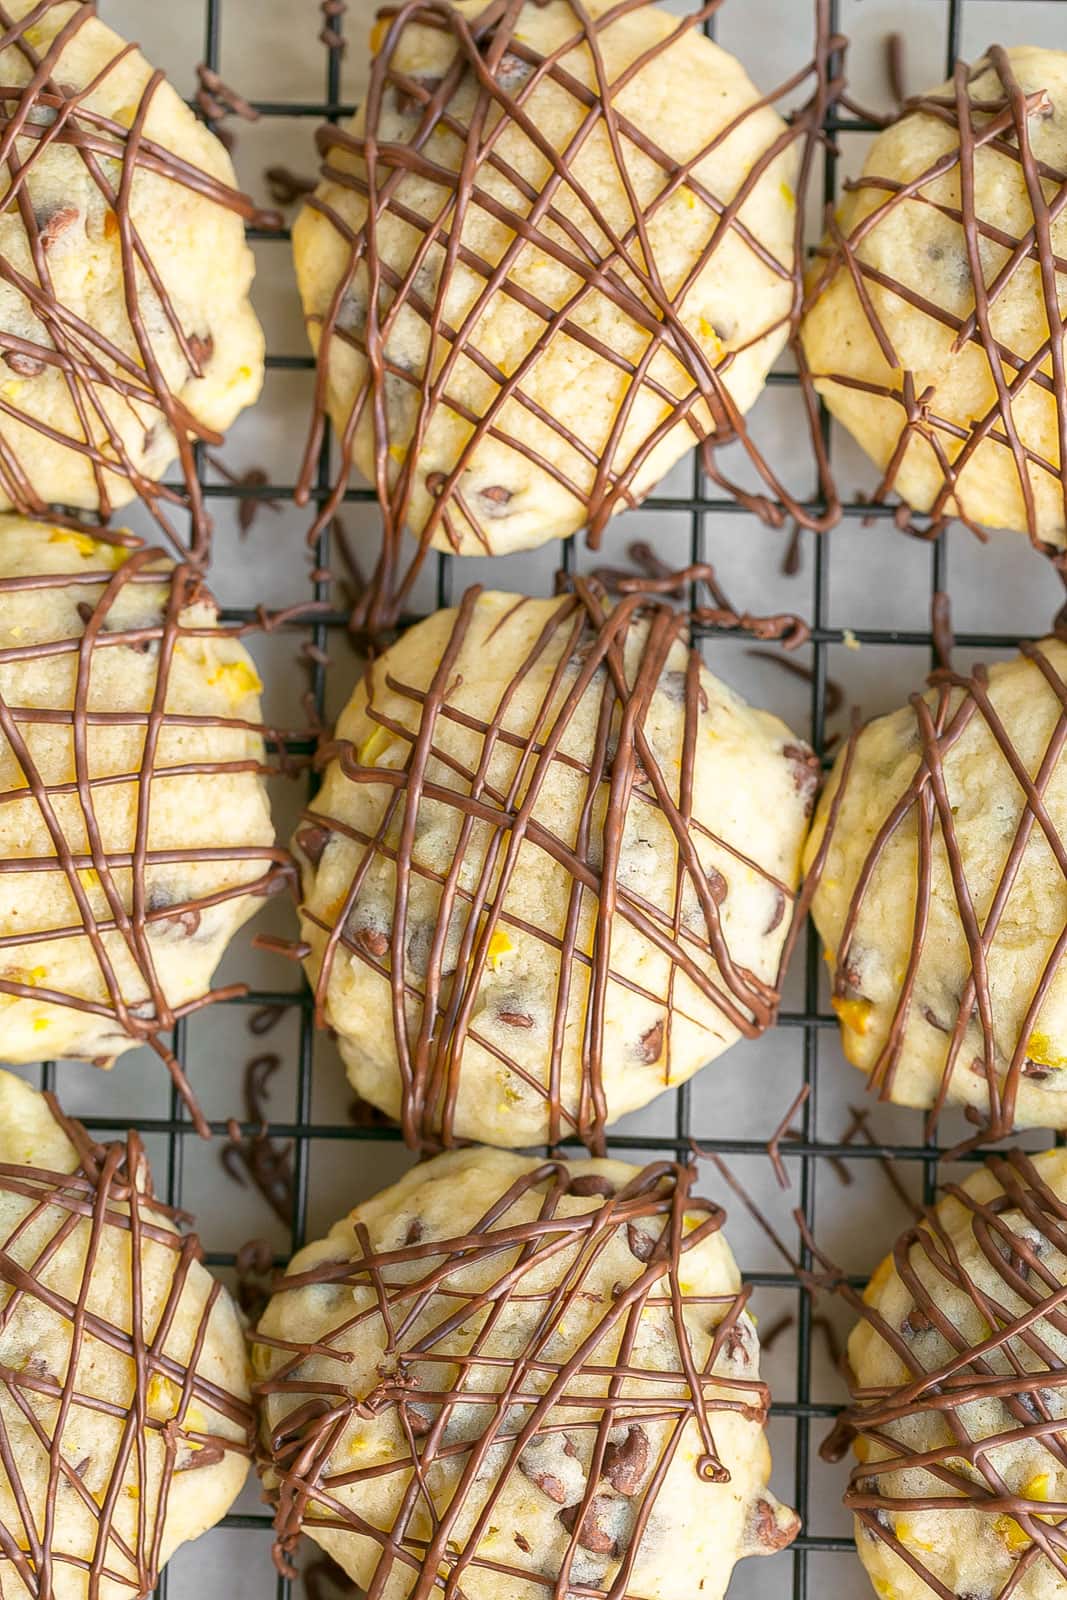 Italian cookies drizzled with chocolate.